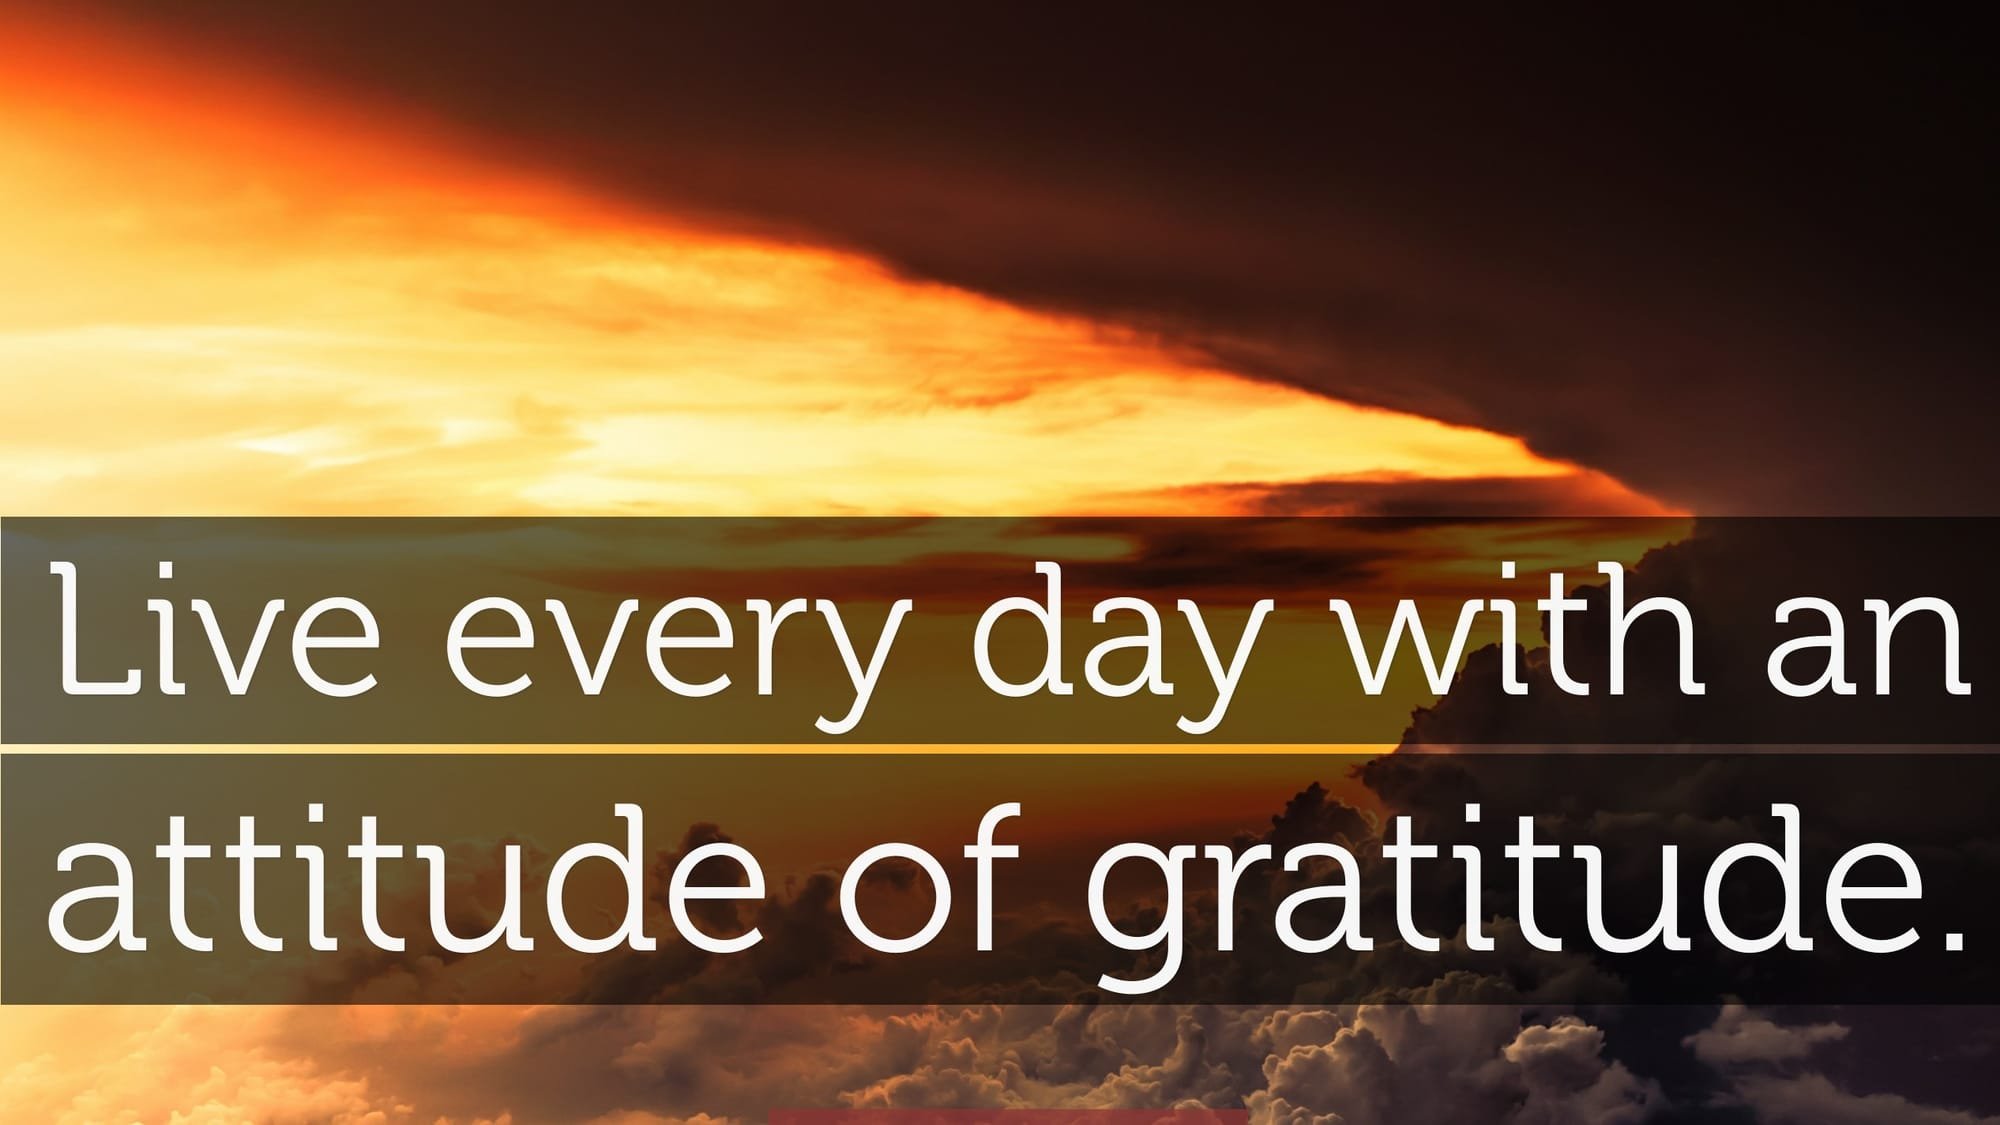 Live Every Day with an Attitude of Gratitude